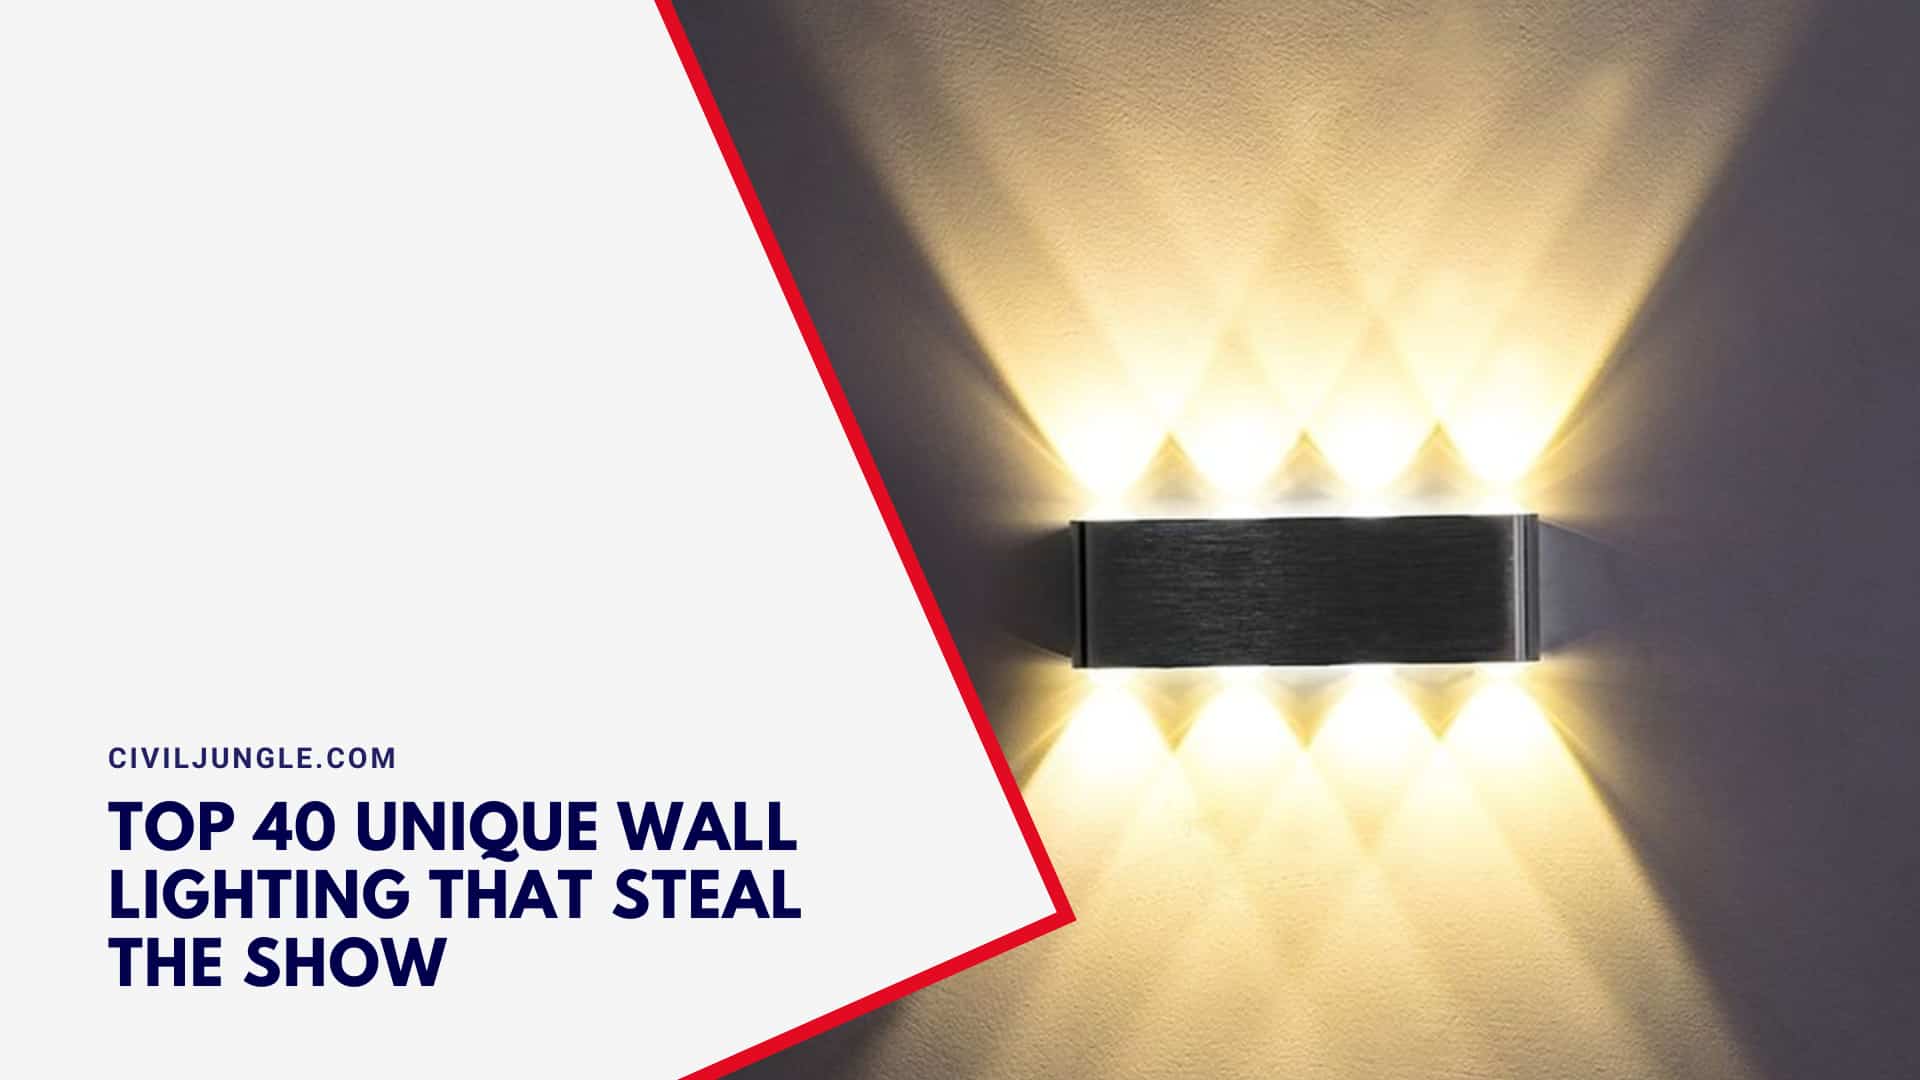 Top 40 Unique Wall Lighting That Steal The Show